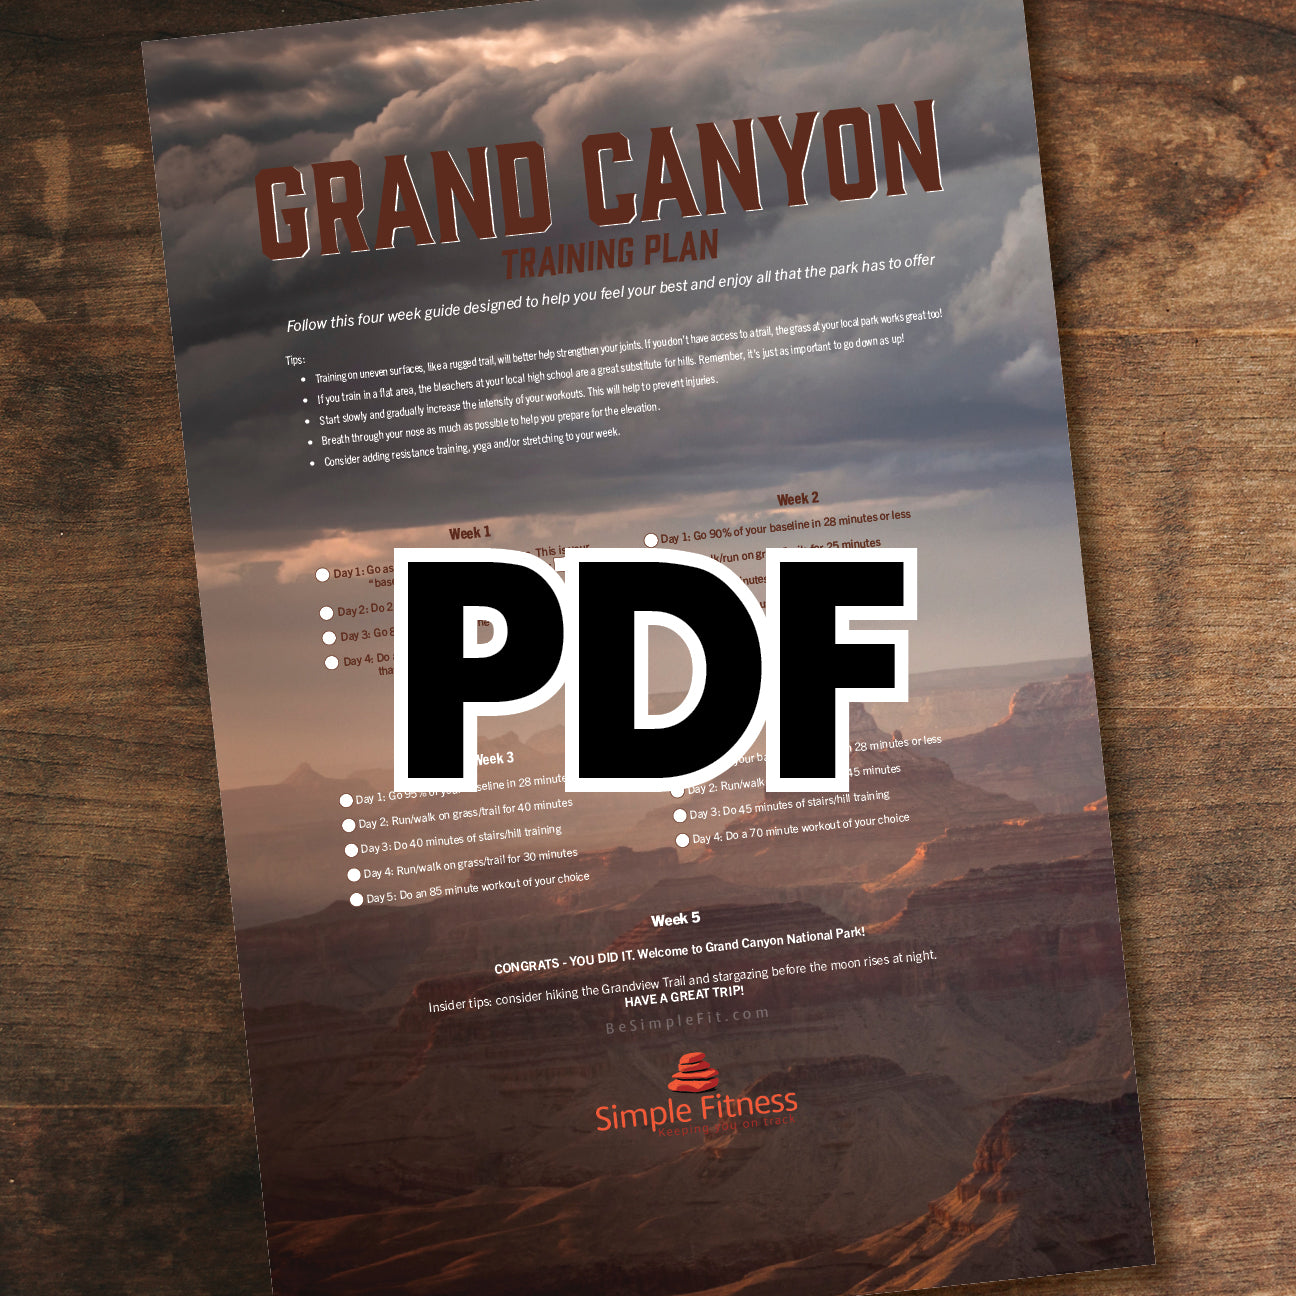 Grand Canyon National Park Training Plan Poster